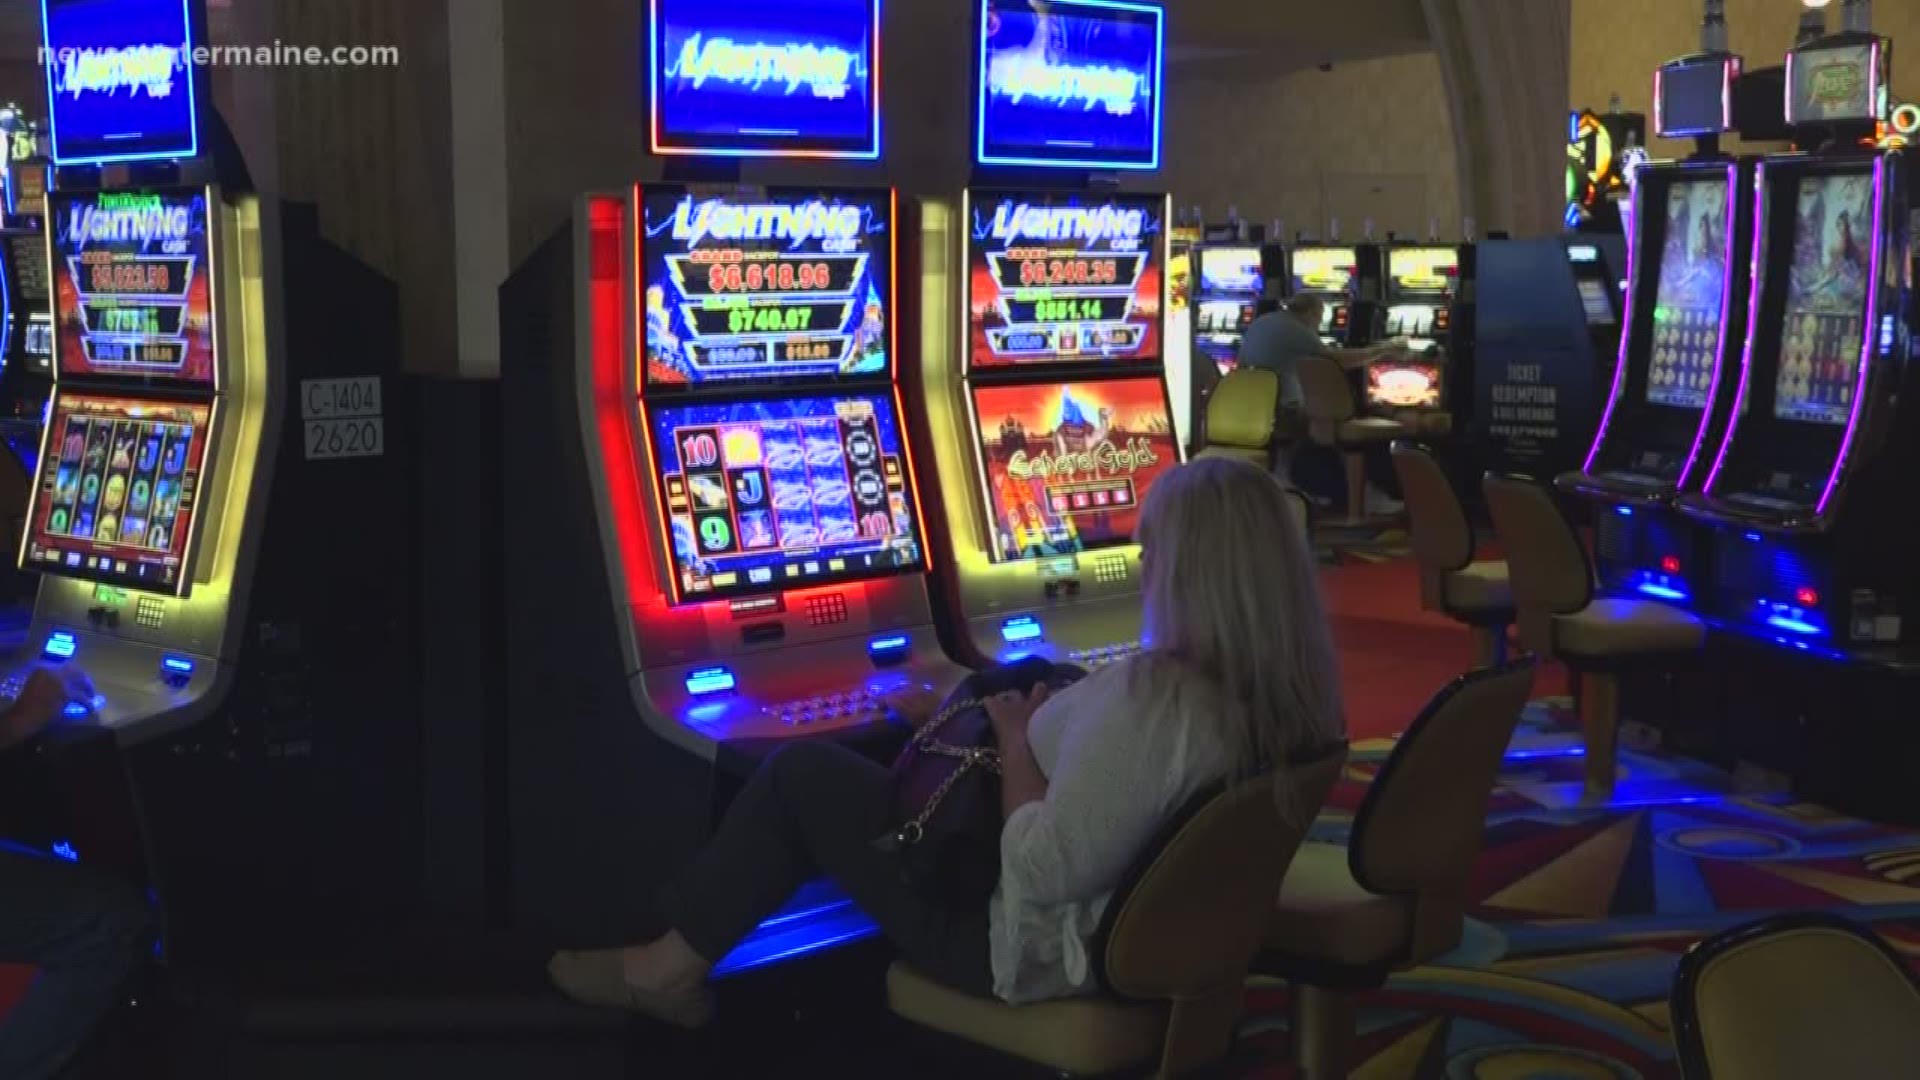 Hollywood Casino in Bangor has extended its hours. It will now remain open 24 hours a day only on weekends.